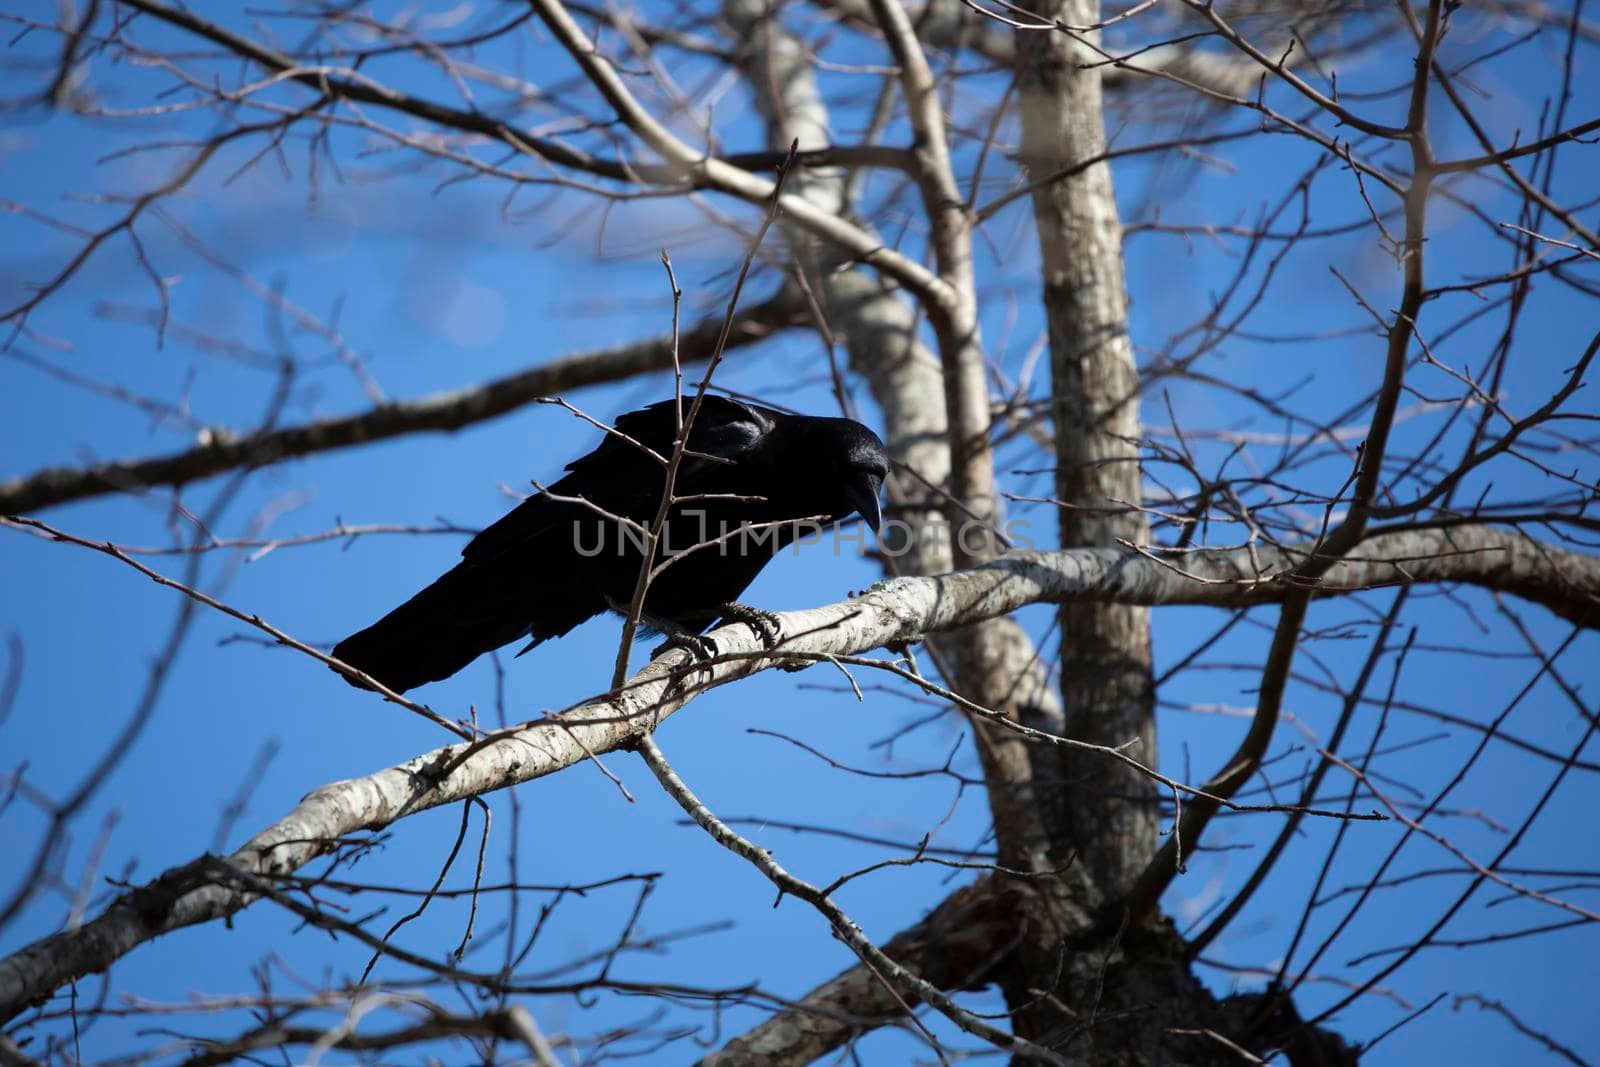 Curious fish crow (Corvus ossifragus) looking down from its perch on a tree branch